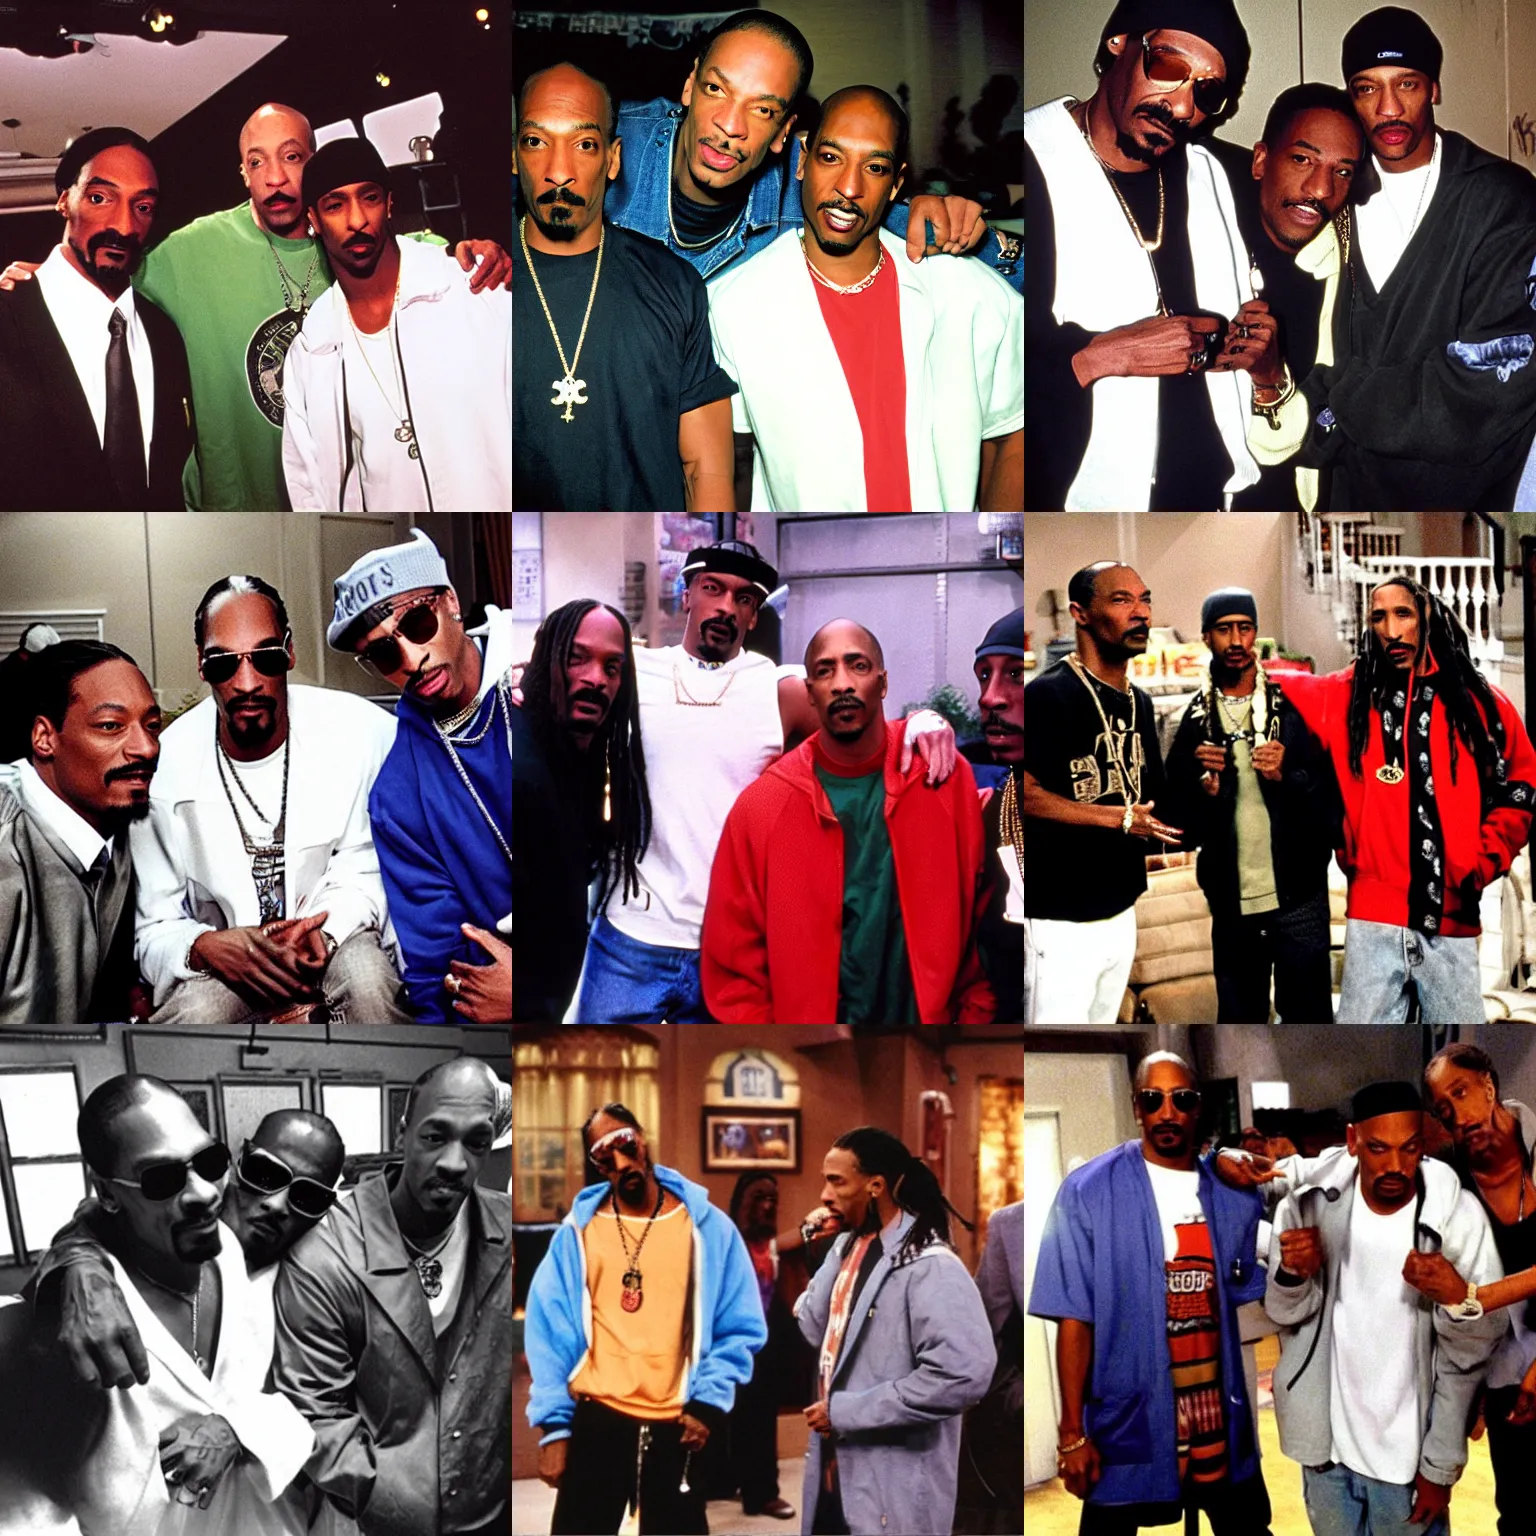 Rare Photos of '90s Hip-Hop Stars Dr Dre, Snoop Dogg, Tupac, and More